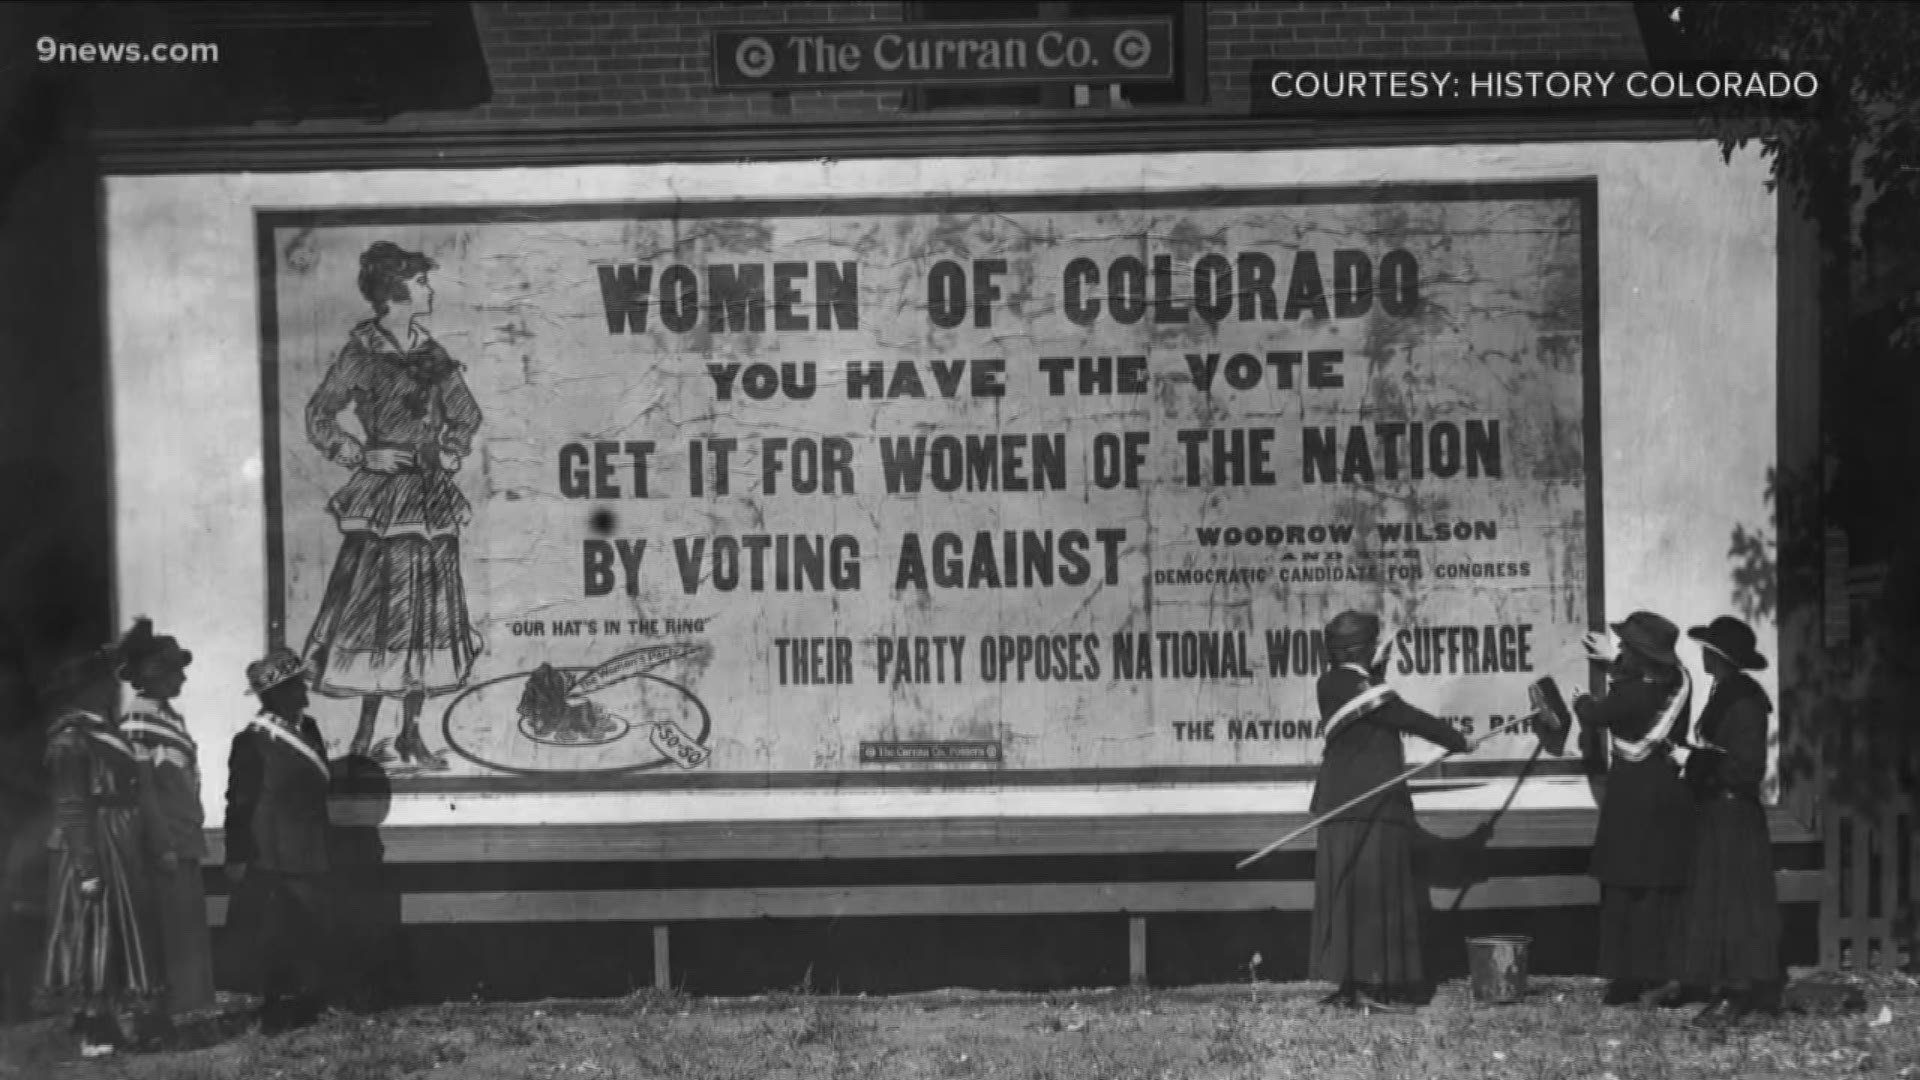 This Tuesday, Coloradans will head to the polls. They'll vote on issues affecting their community locally and statewide. 126 years ago, Coloradans did the same.